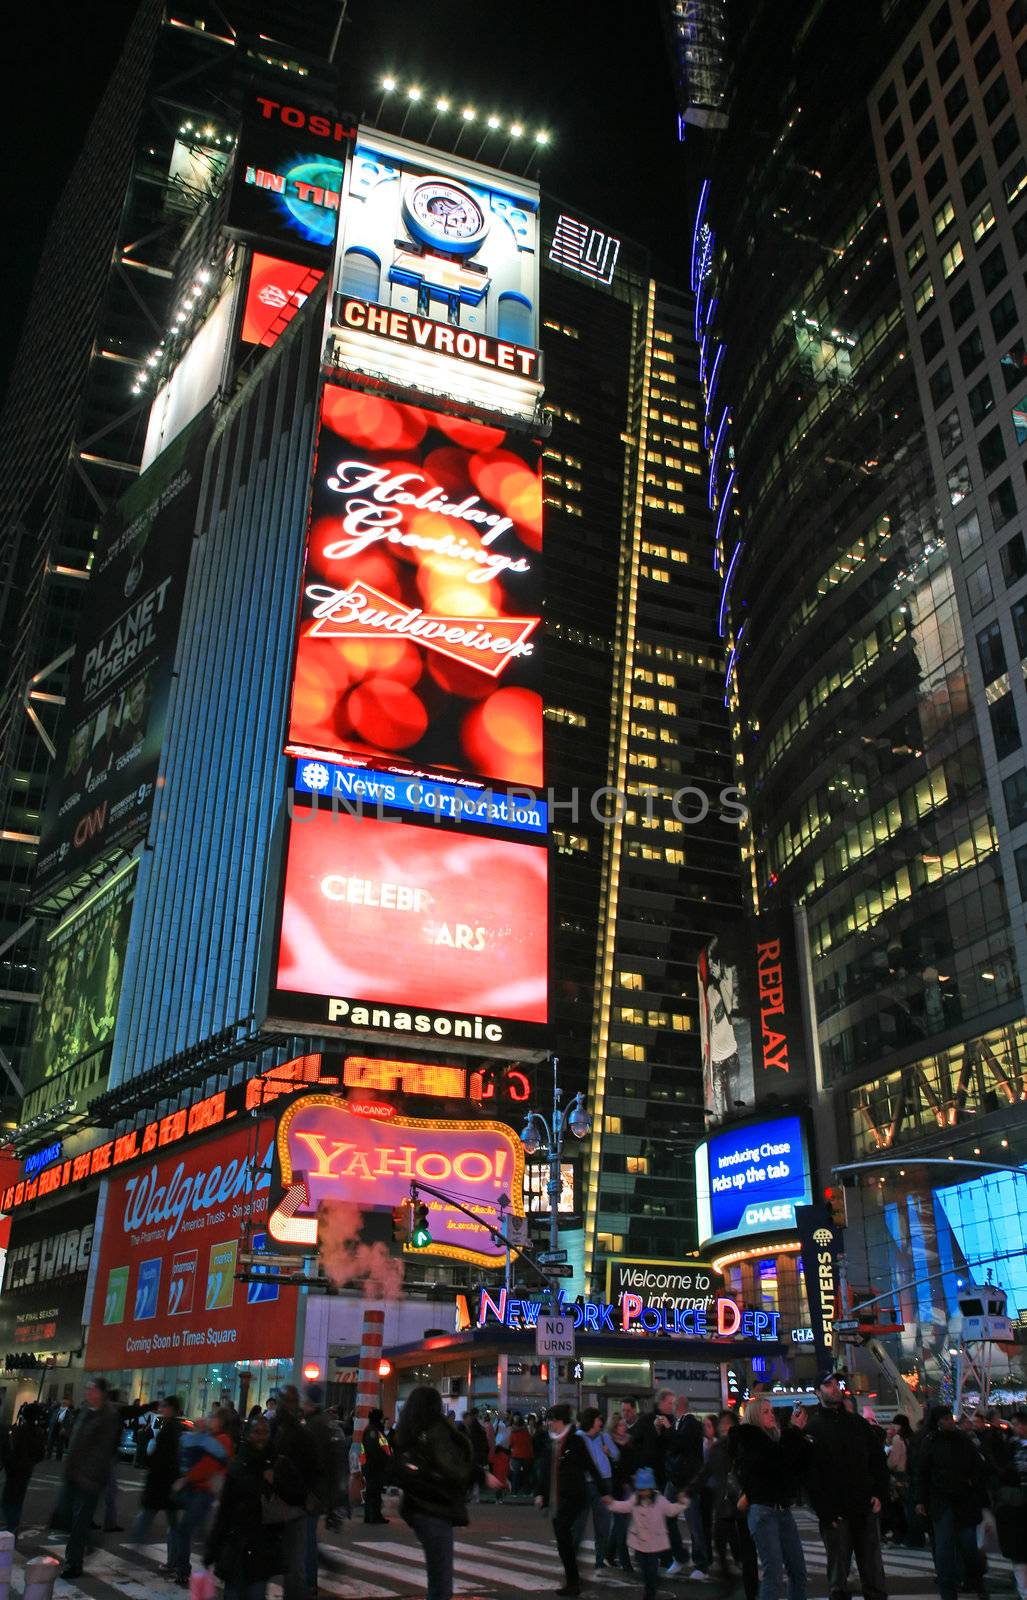 The tourists crowded in the Times Square in Manhattan on Dec 29, 2008  